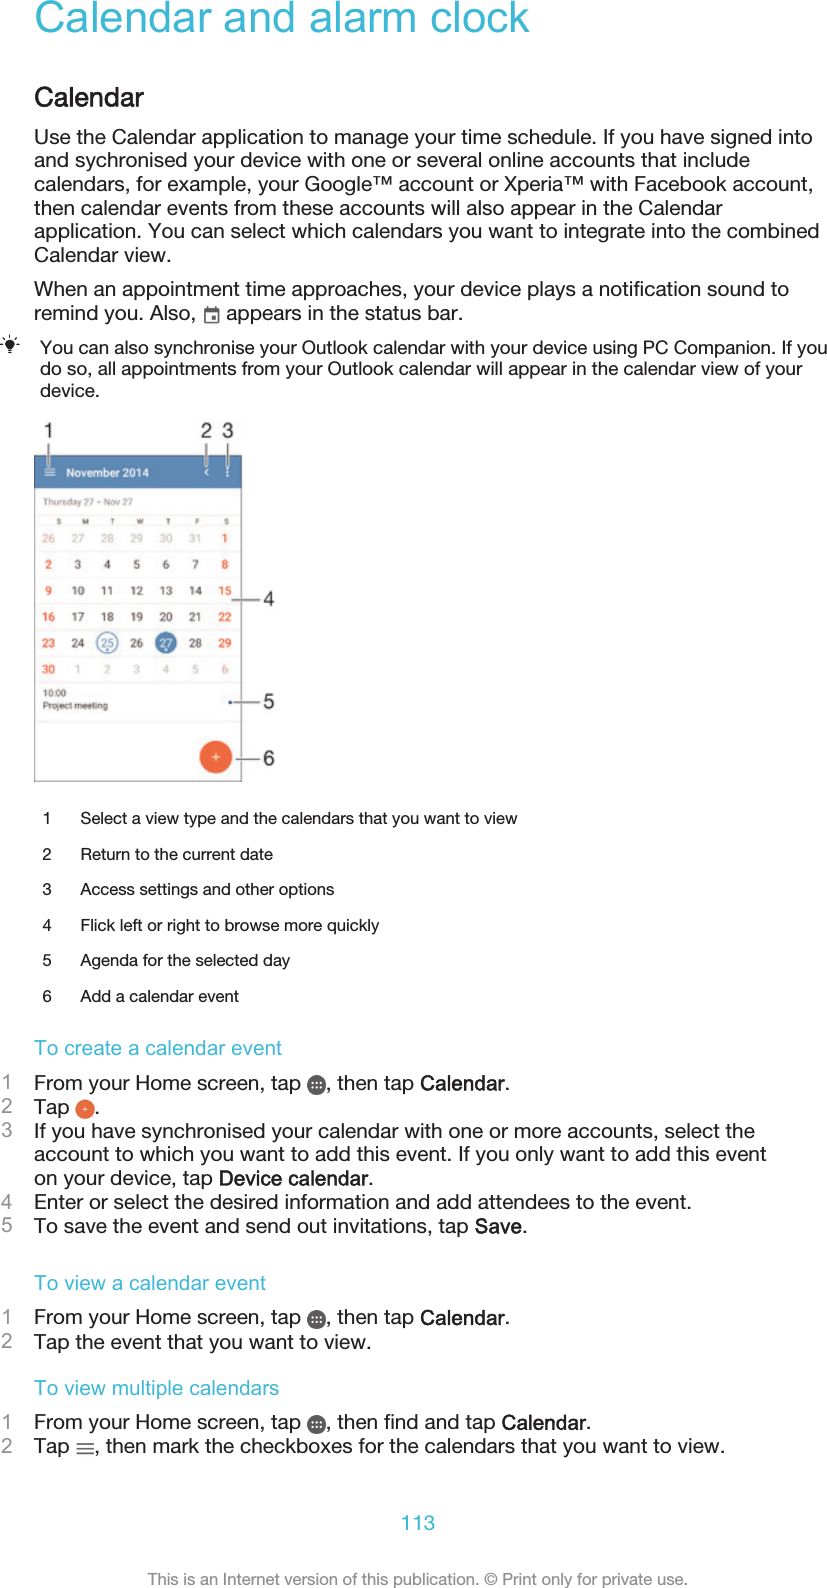 Calendar and alarm clockCalendarUse the Calendar application to manage your time schedule. If you have signed intoand sychronised your device with one or several online accounts that includecalendars, for example, your Google™ account or Xperia™ with Facebook account,then calendar events from these accounts will also appear in the Calendarapplication. You can select which calendars you want to integrate into the combinedCalendar view.When an appointment time approaches, your device plays a notification sound toremind you. Also,   appears in the status bar.You can also synchronise your Outlook calendar with your device using PC Companion. If youdo so, all appointments from your Outlook calendar will appear in the calendar view of yourdevice.1 Select a view type and the calendars that you want to view2 Return to the current date3 Access settings and other options4 Flick left or right to browse more quickly5 Agenda for the selected day6 Add a calendar eventTo create a calendar event1From your Home screen, tap  , then tap Calendar.2Tap  .3If you have synchronised your calendar with one or more accounts, select theaccount to which you want to add this event. If you only want to add this eventon your device, tap Device calendar.4Enter or select the desired information and add attendees to the event.5To save the event and send out invitations, tap Save.To view a calendar event1From your Home screen, tap  , then tap Calendar.2Tap the event that you want to view.To view multiple calendars1From your Home screen, tap  , then find and tap Calendar.2Tap  , then mark the checkboxes for the calendars that you want to view.113This is an Internet version of this publication. © Print only for private use.